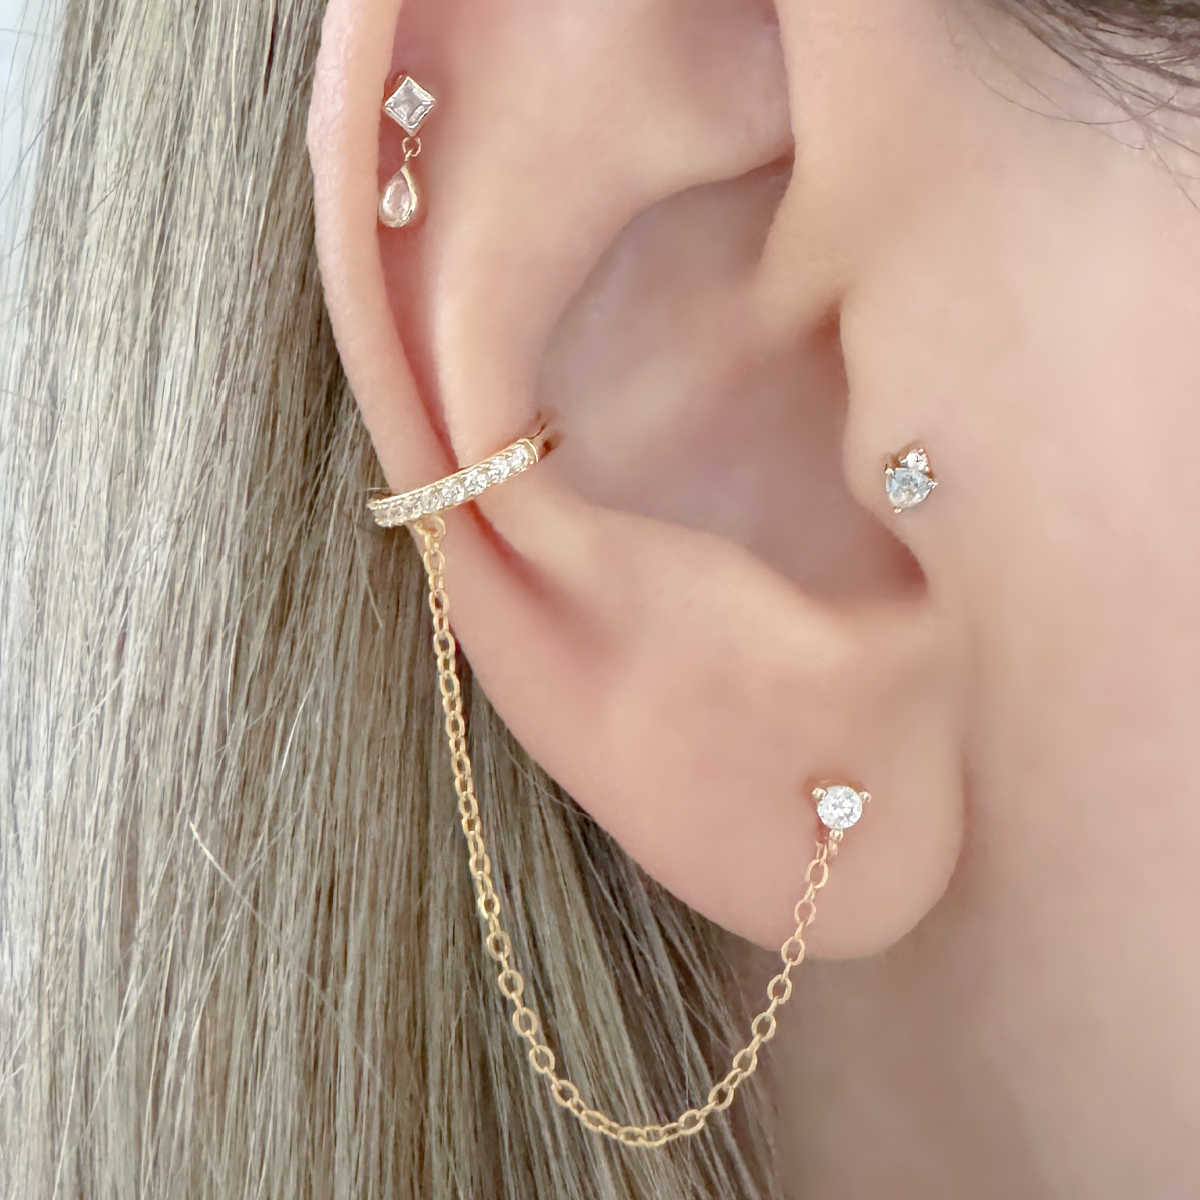 Ear Cuff with Stud | Connected Chain Faux Conch Earring on Model